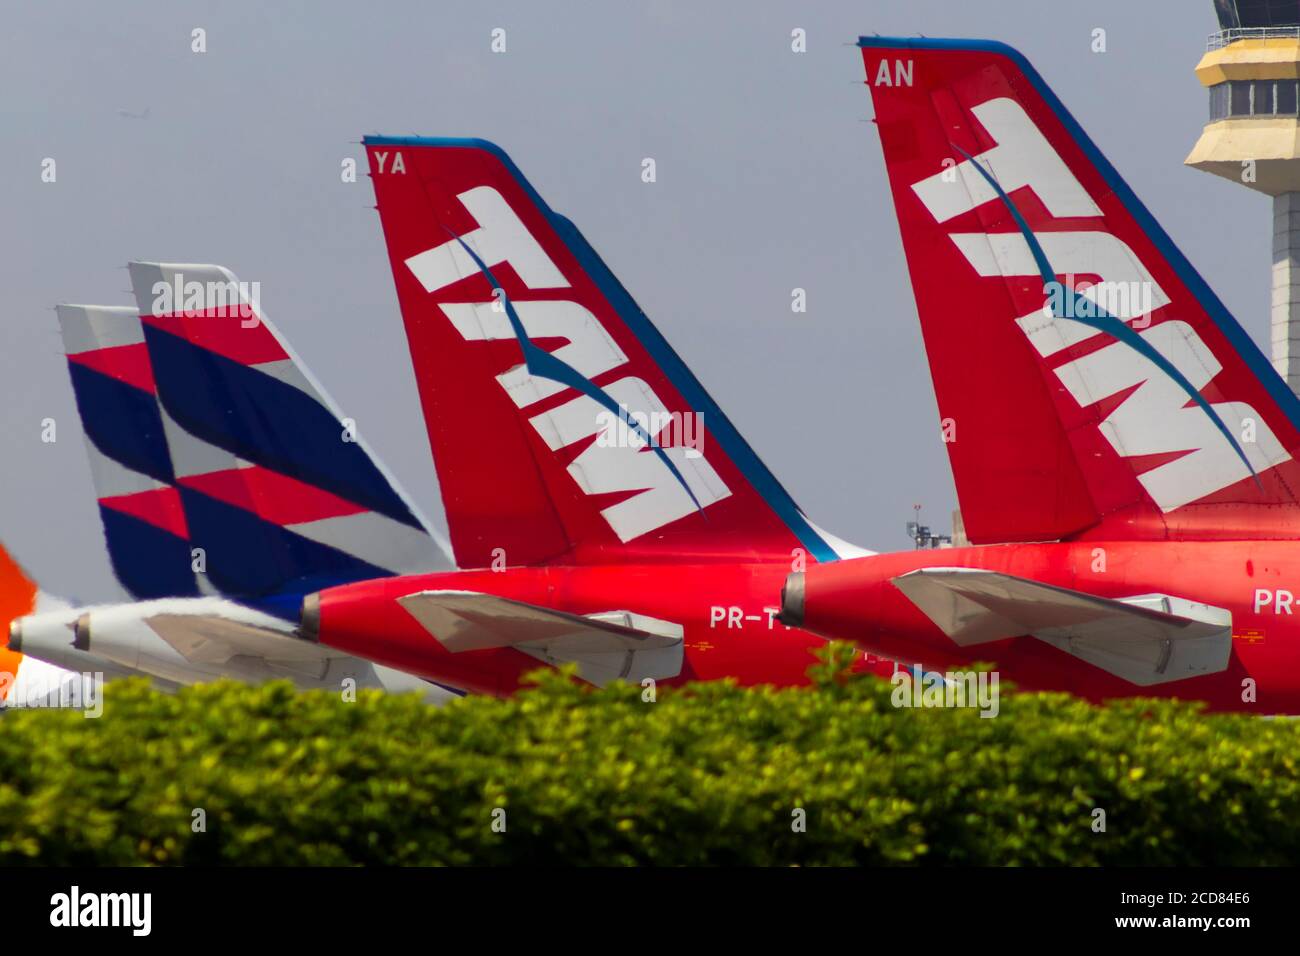 Aircraft tails LATAM AIrlines, som still using the old TAM logo, at  Congonhas AIrport in São Paulo, Brazil Stock Photo - Alamy